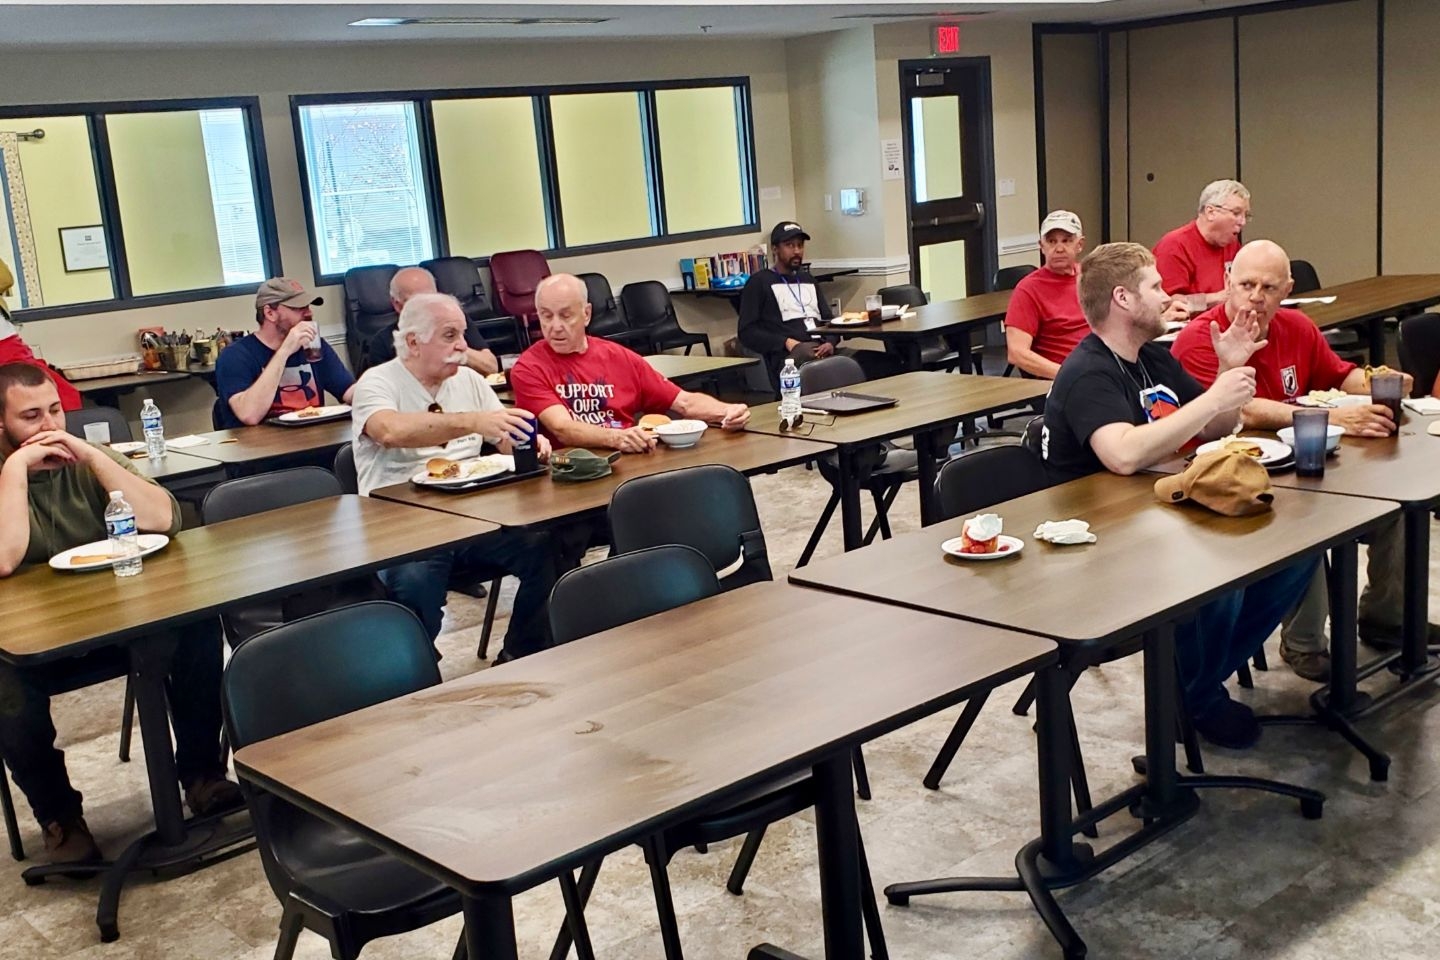 Members of Post 8466 join residents for lunch at the Veterans Life Center in Butner, NC.